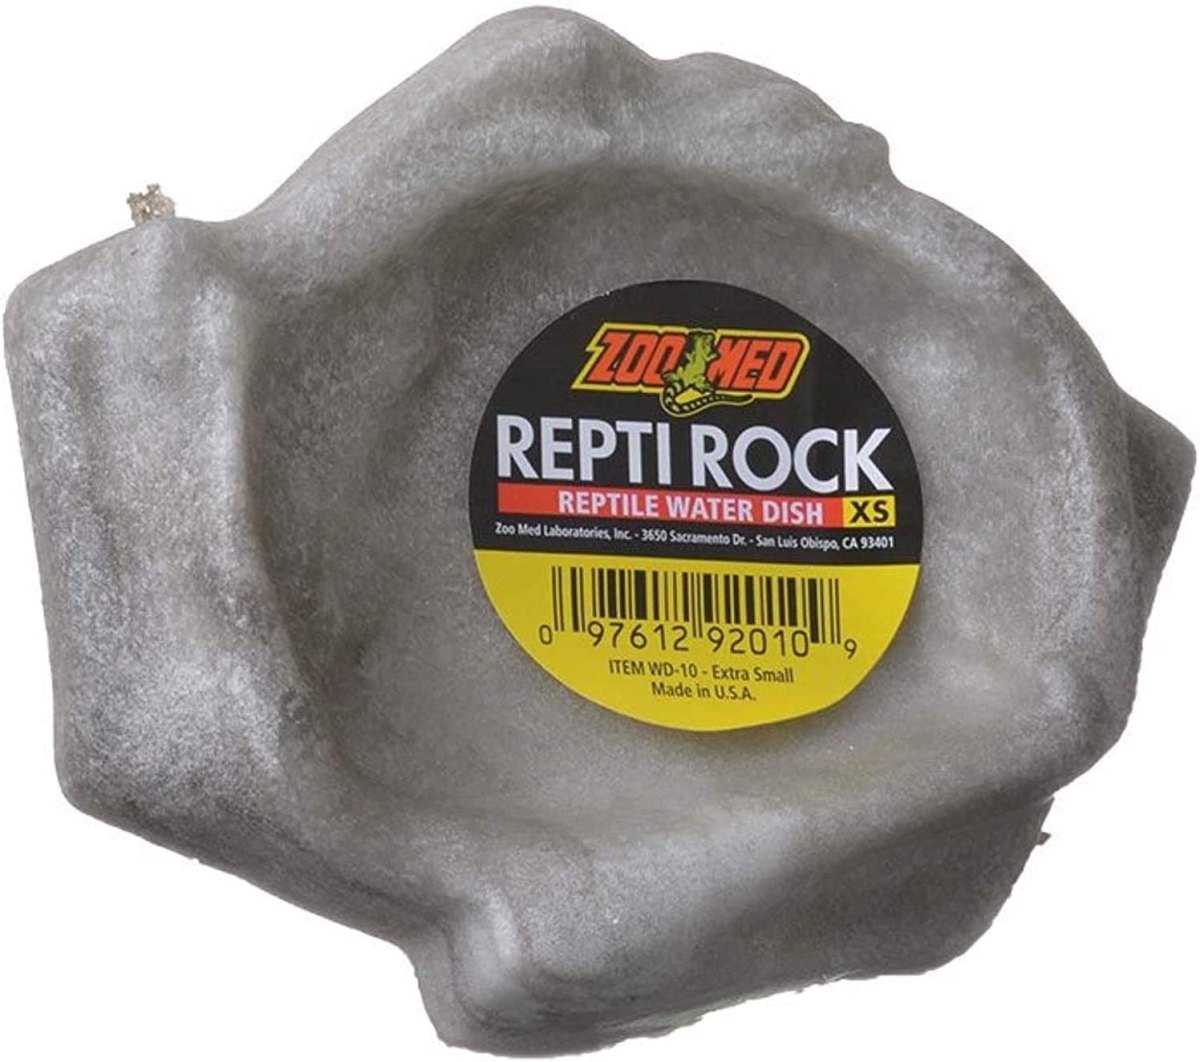 Picture of Zoo Med ZM92020M Repti Rock Reptile Water Dish